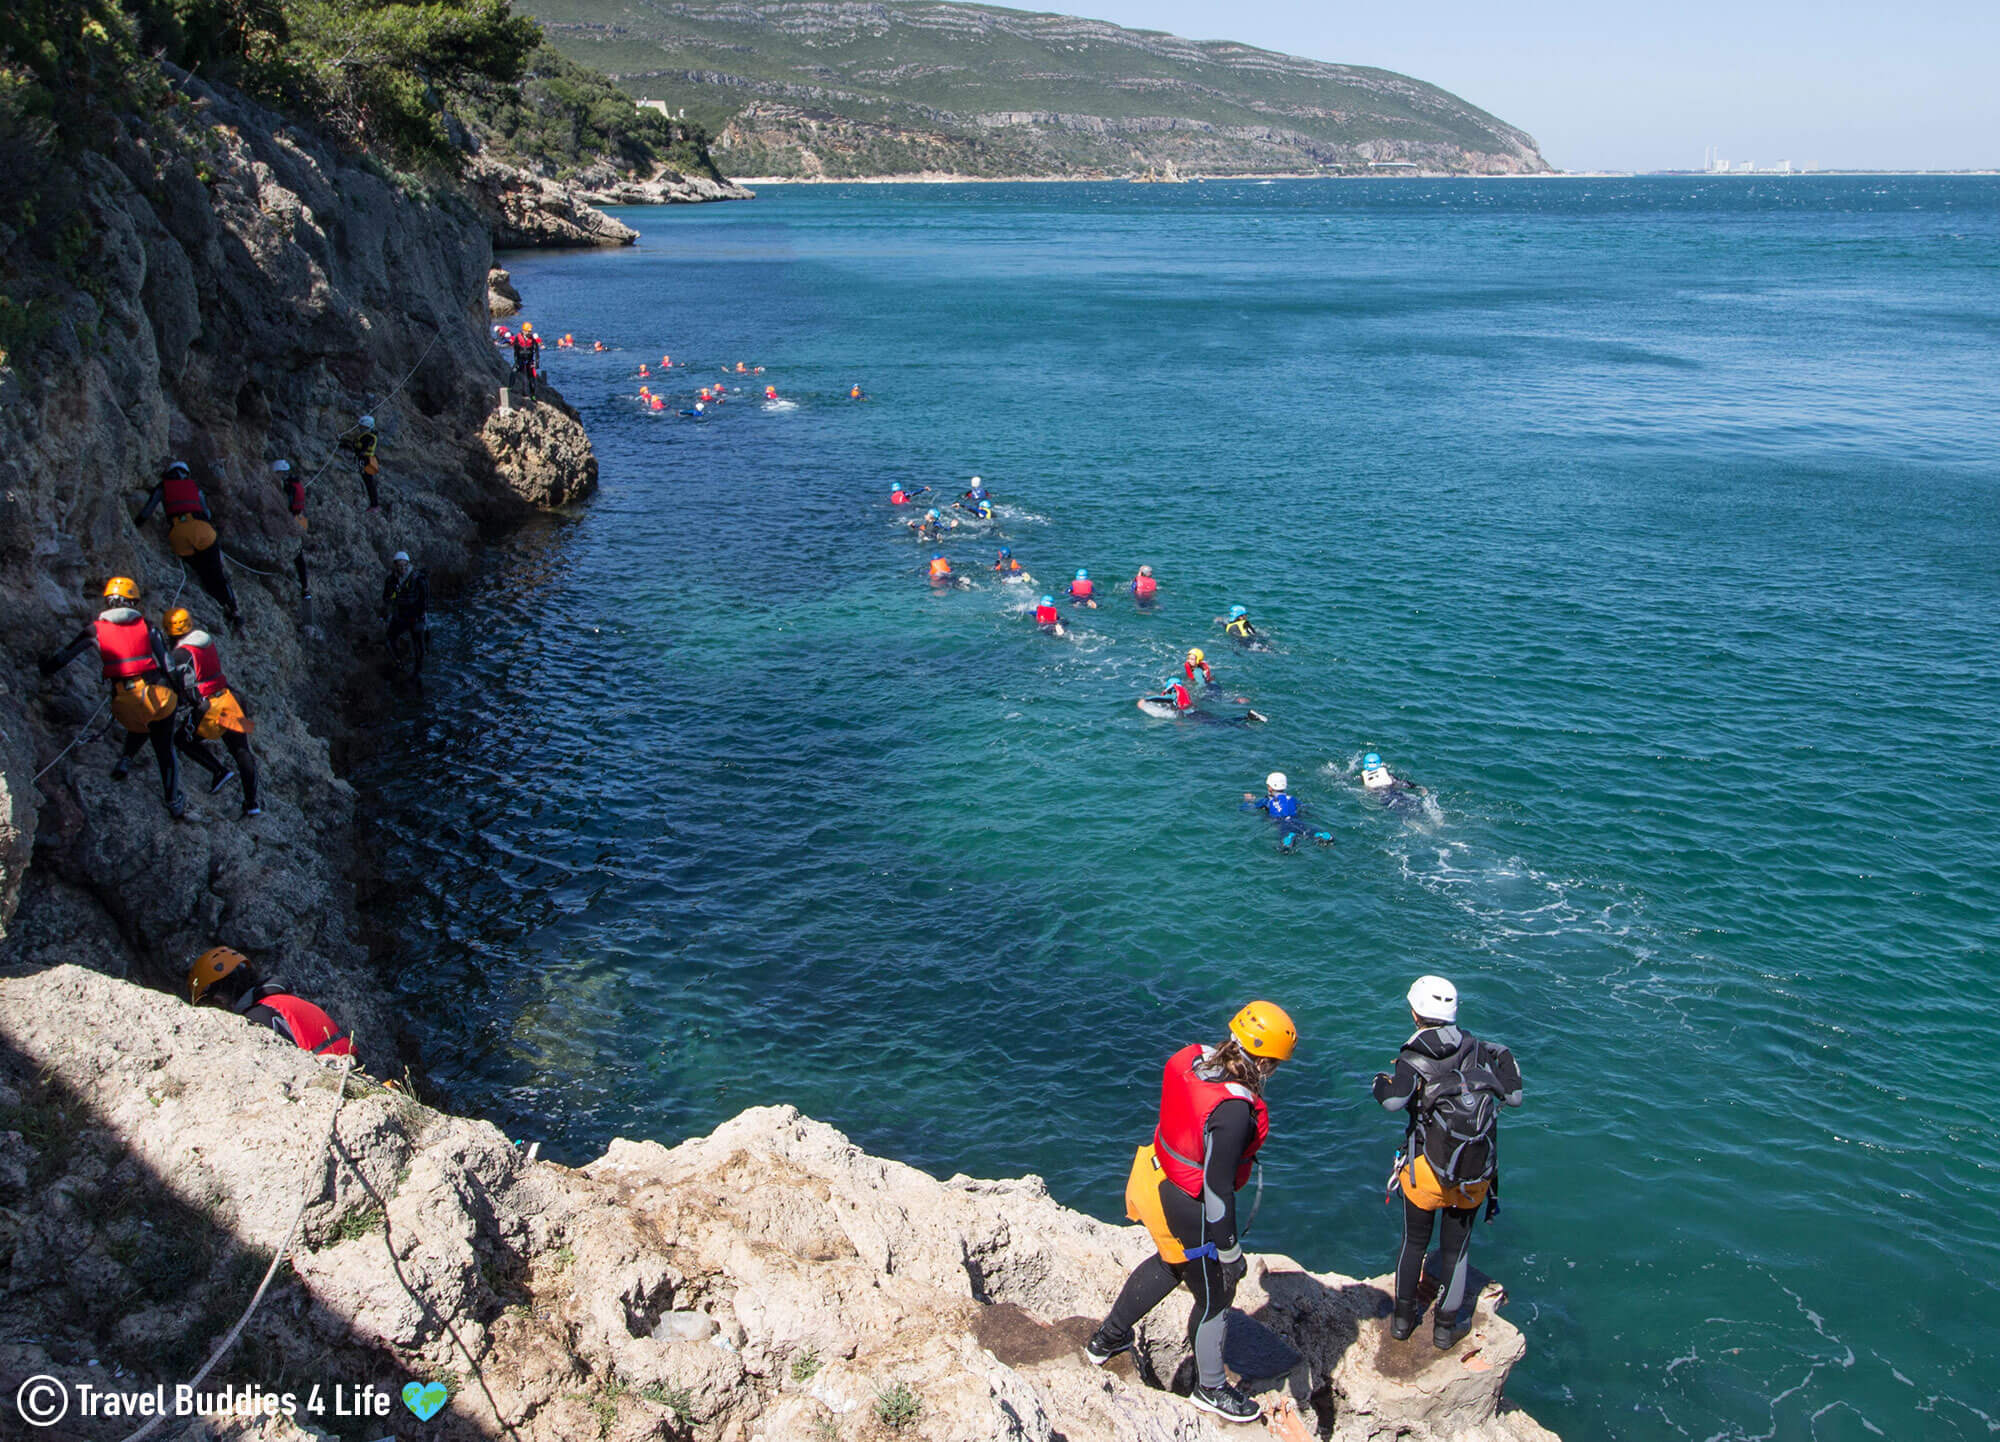 Coasteering Group in the Water Swimming to the Next Cliff Jumping Location in the Arrábida Nature Park